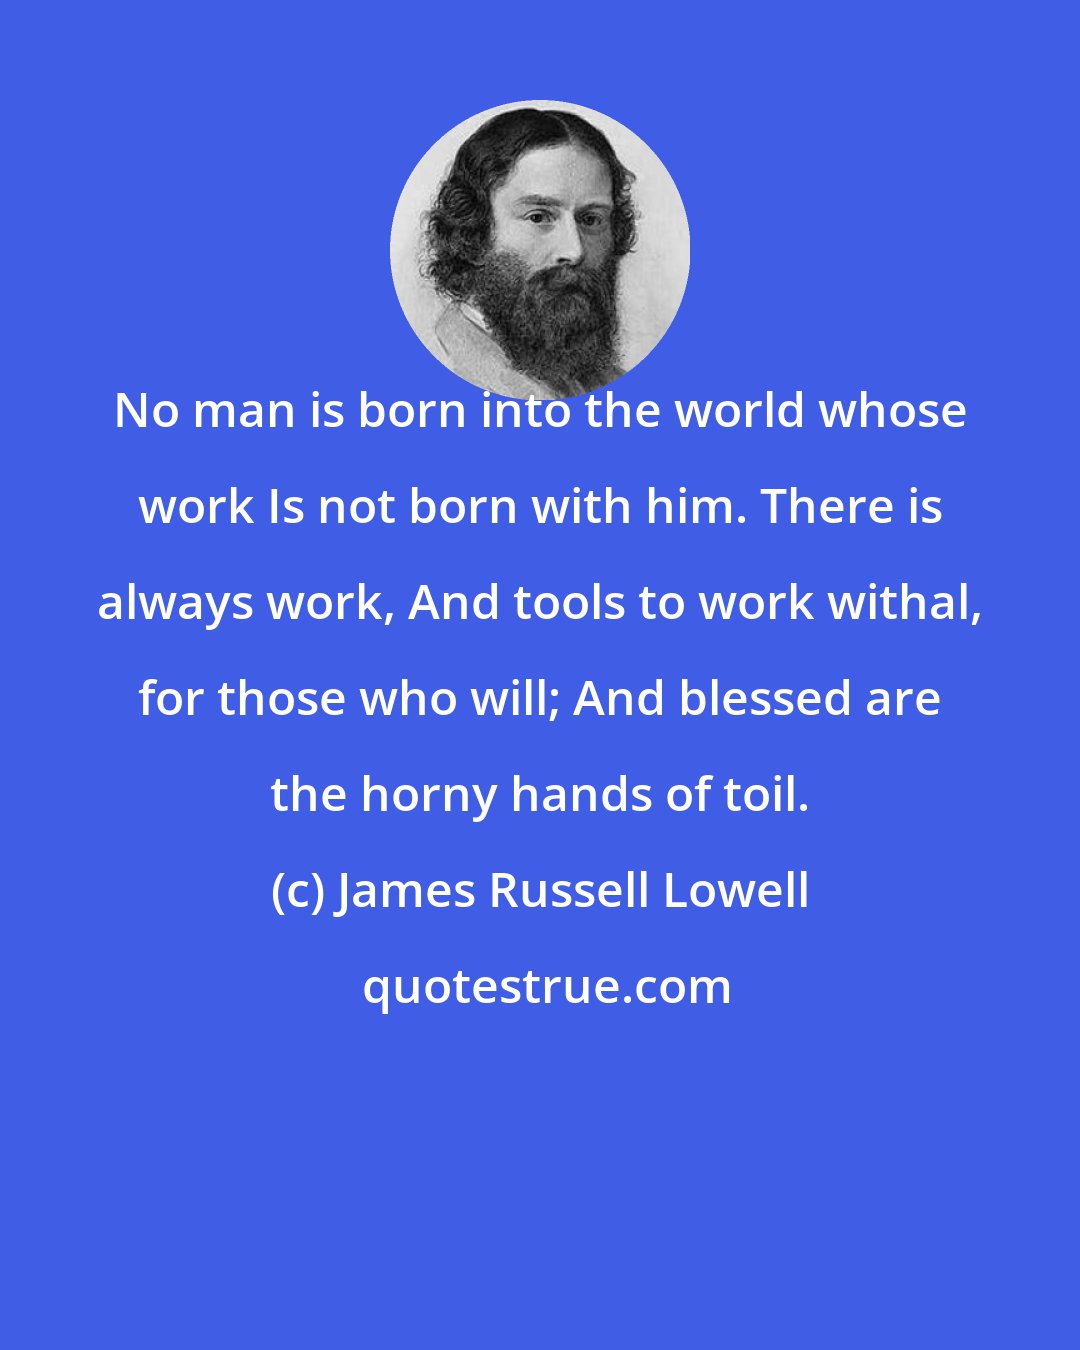 James Russell Lowell: No man is born into the world whose work Is not born with him. There is always work, And tools to work withal, for those who will; And blessed are the horny hands of toil.